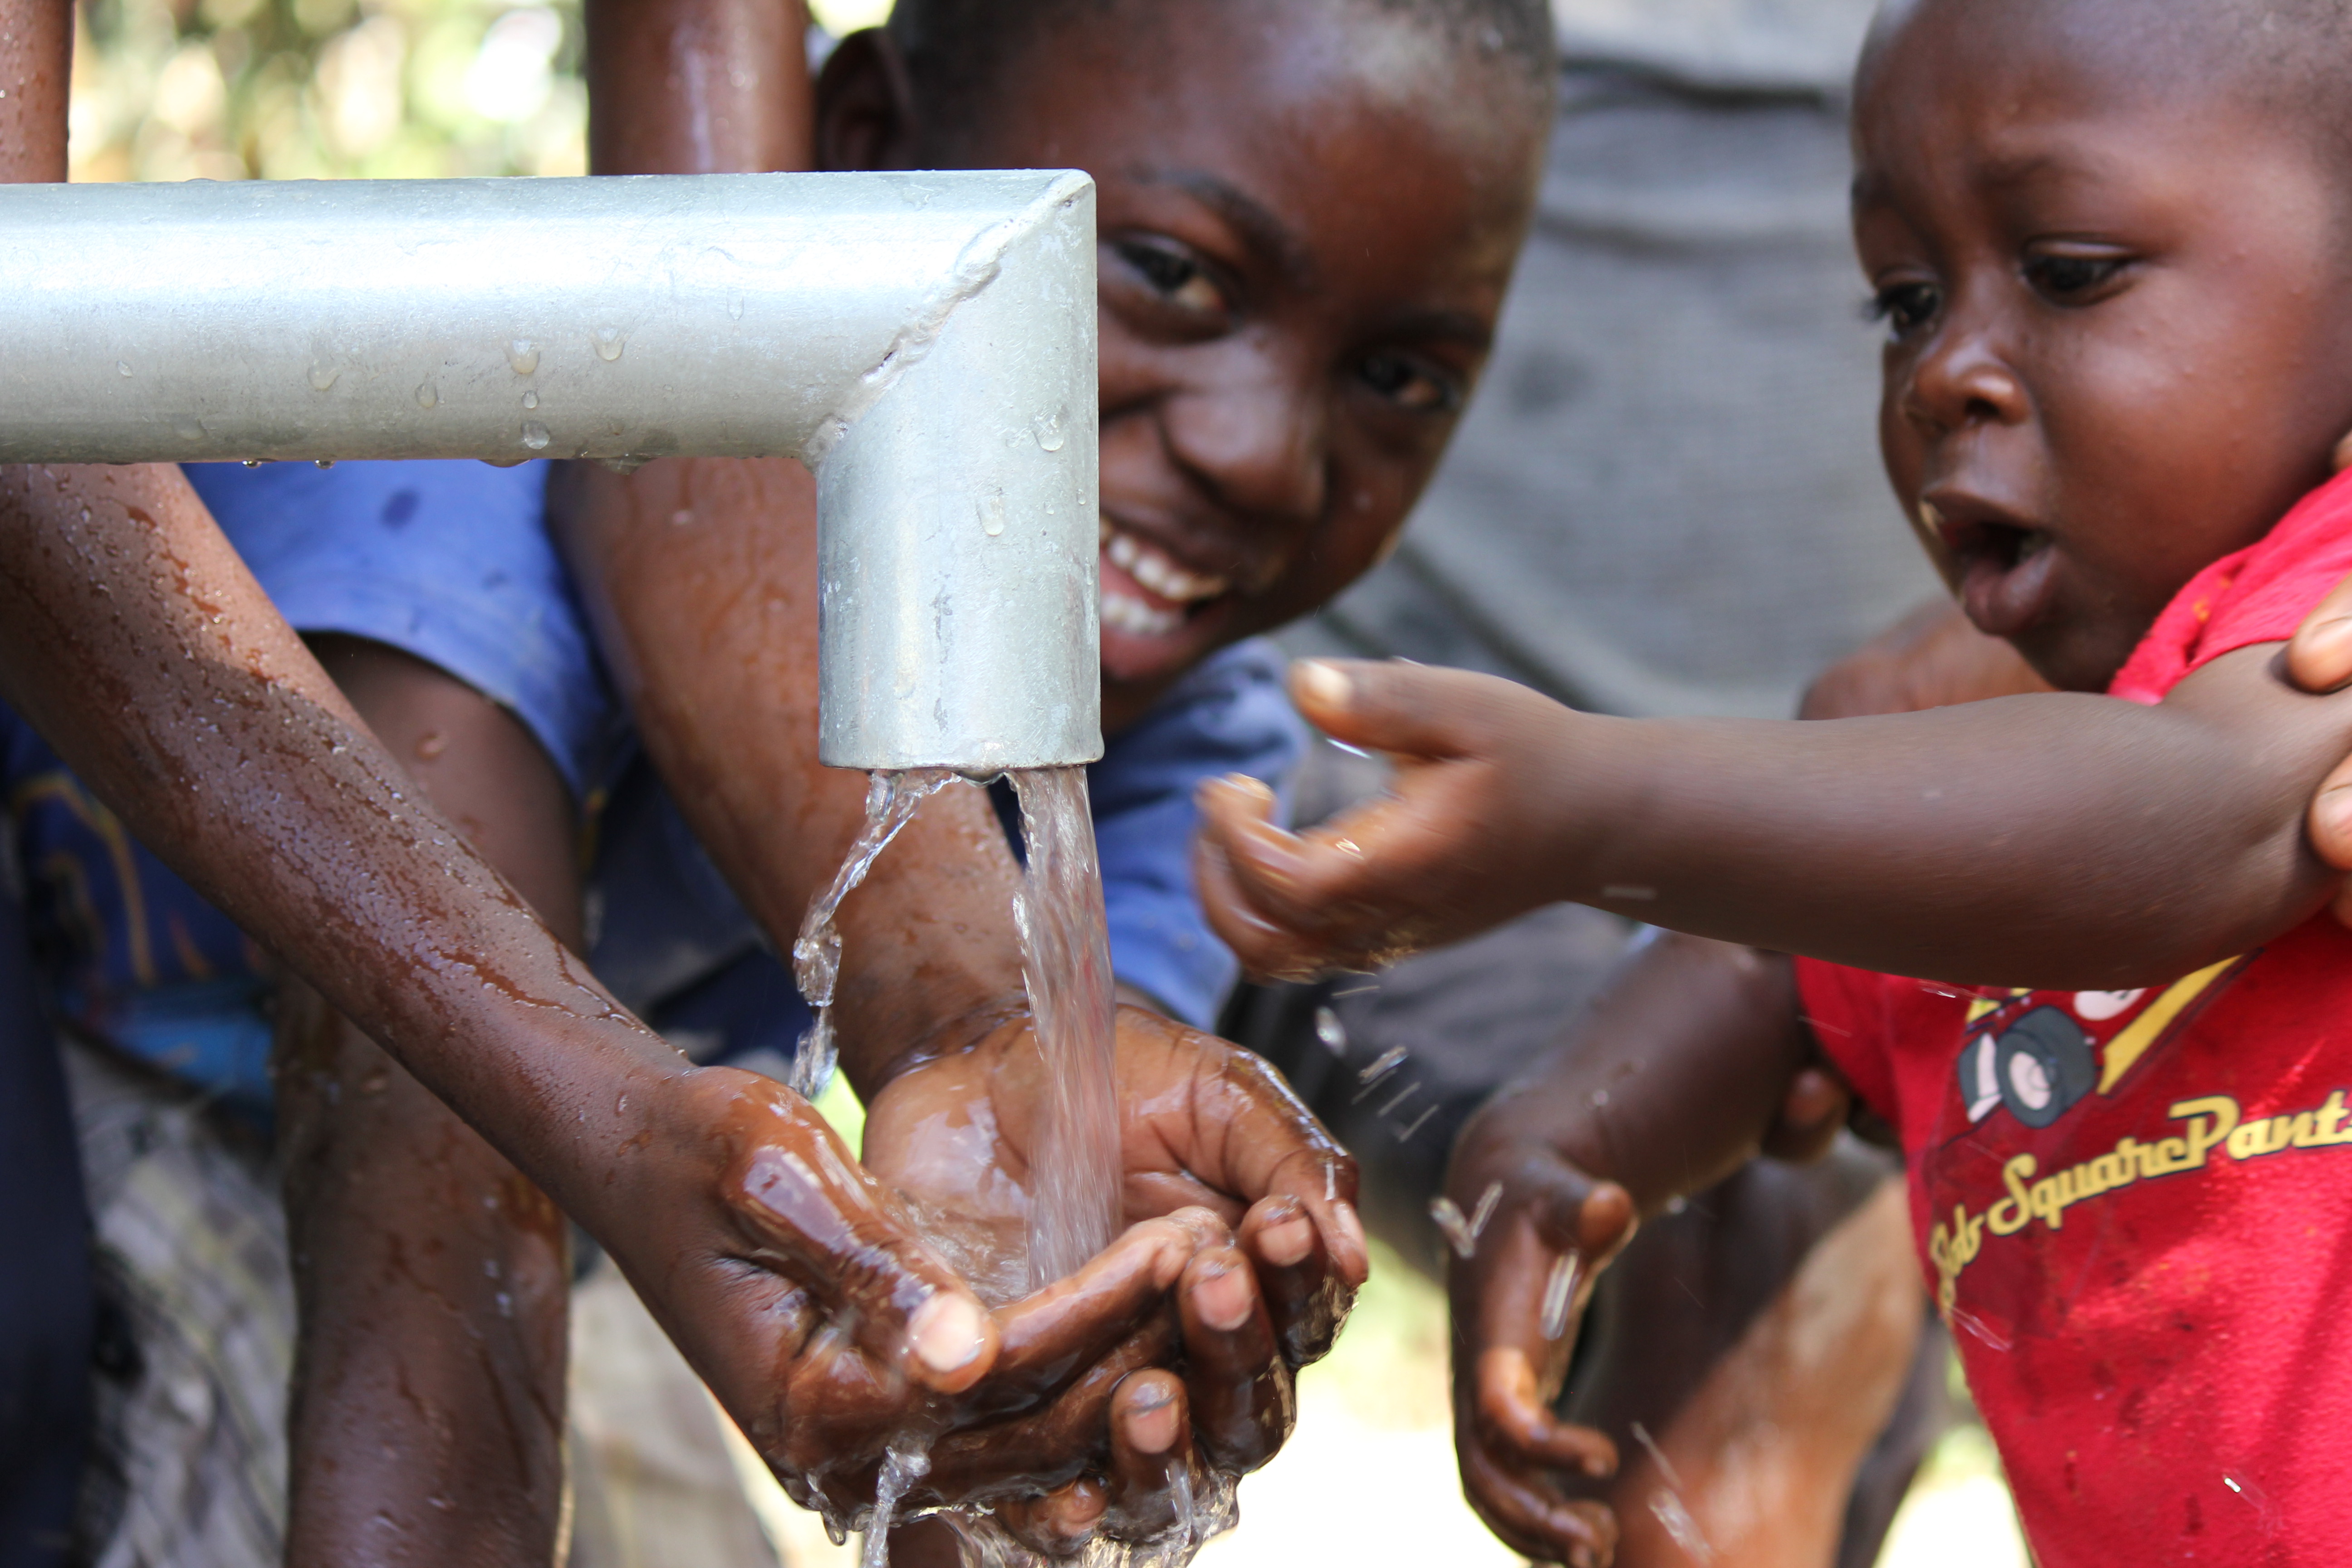 Children smiling as they run their hands under water from a hand pump